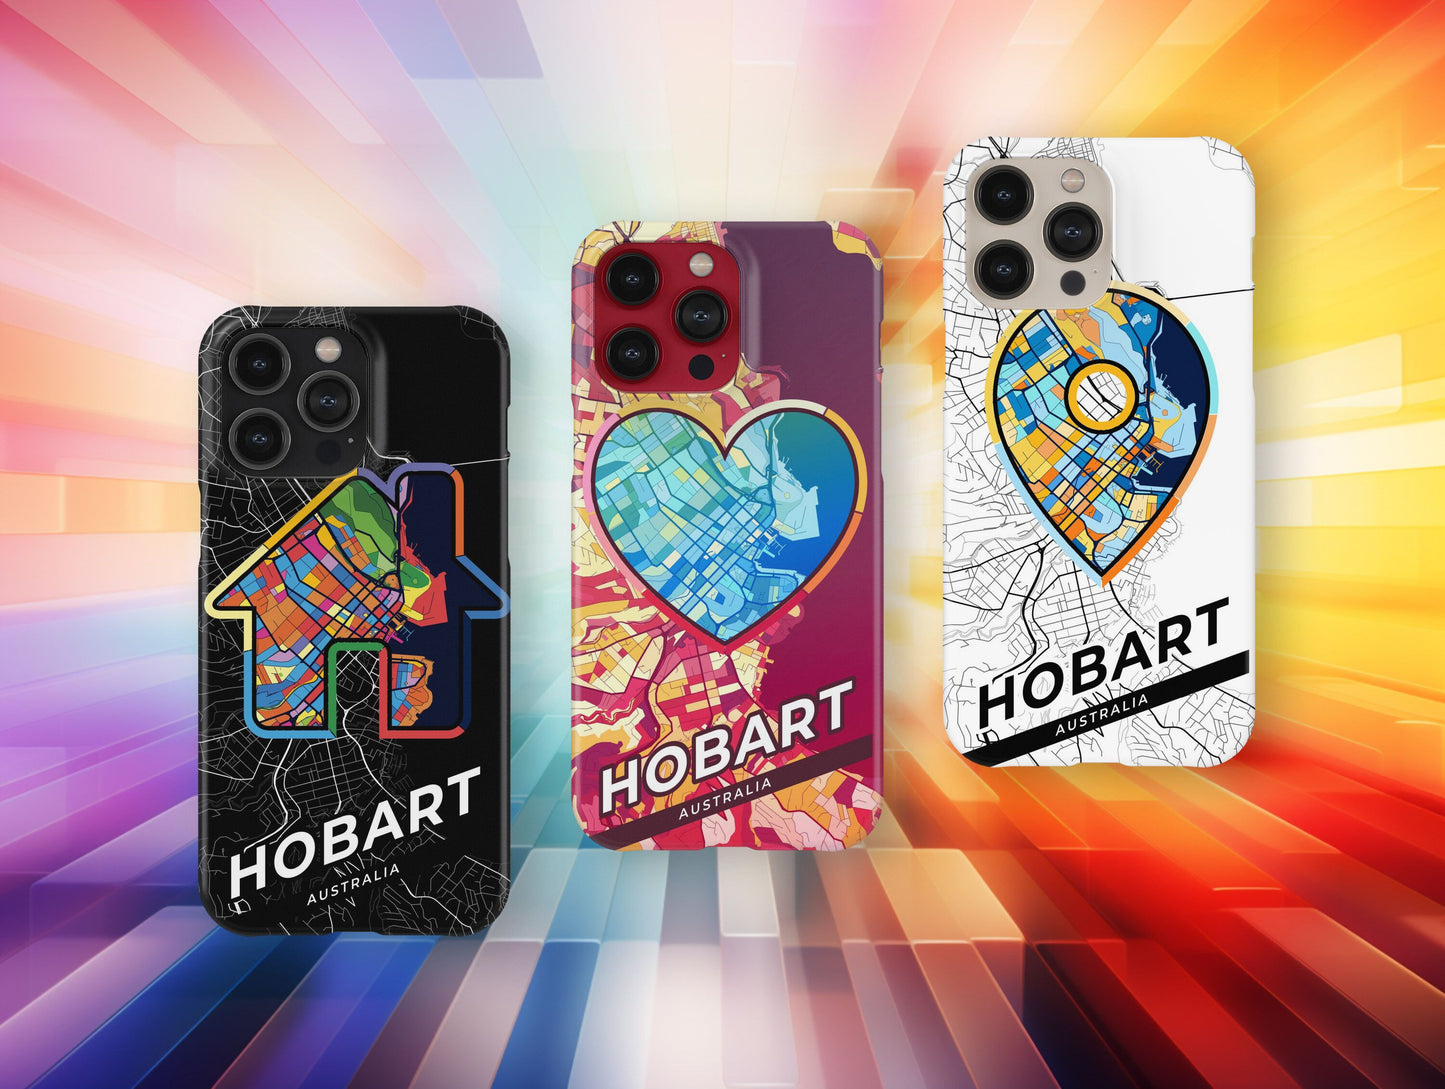 Hobart Australia slim phone case with colorful icon. Birthday, wedding or housewarming gift. Couple match cases.